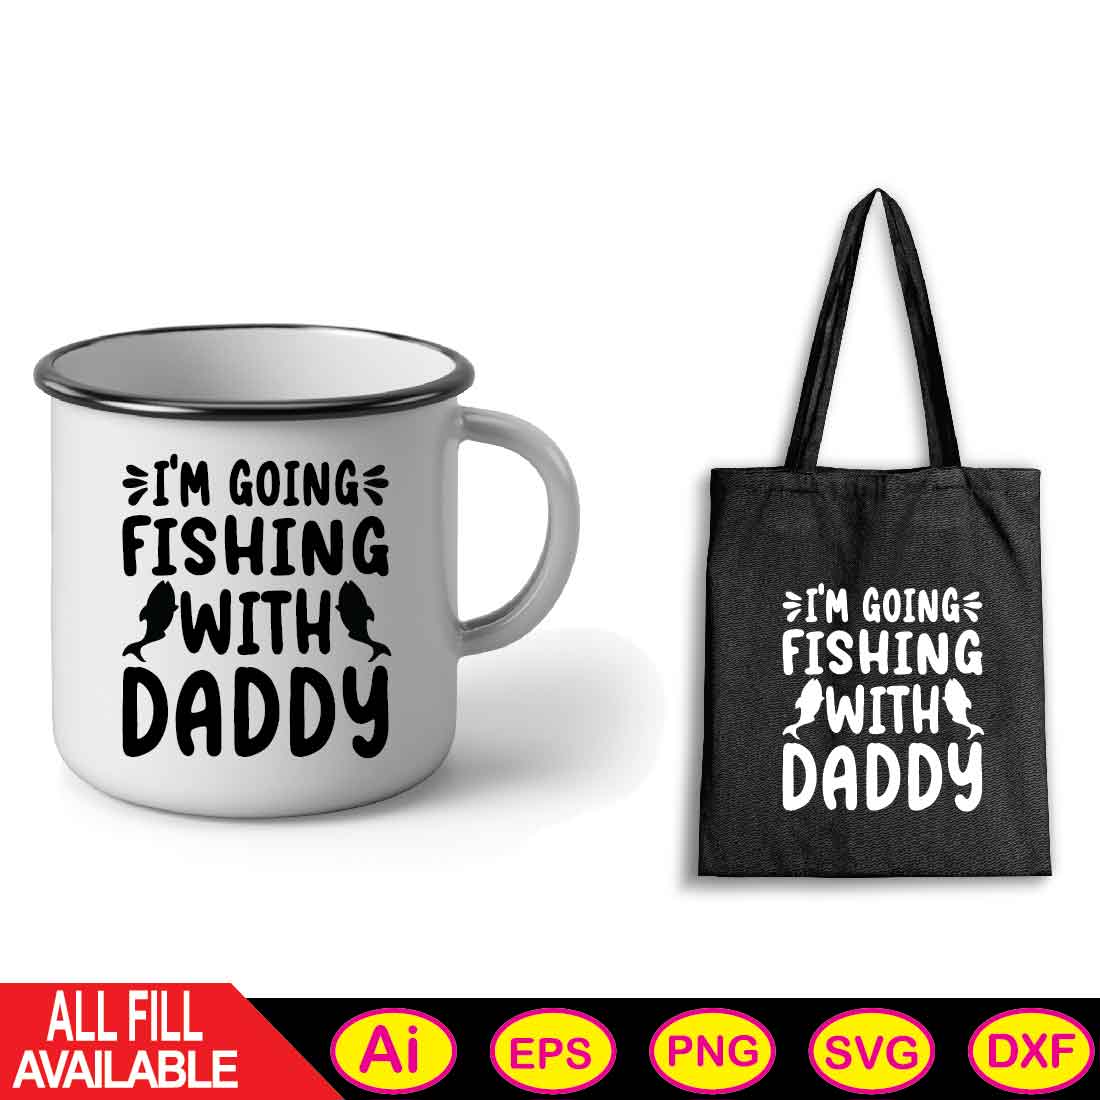 IM GOING FISHING WITH DADDY svg t-shirt preview image.